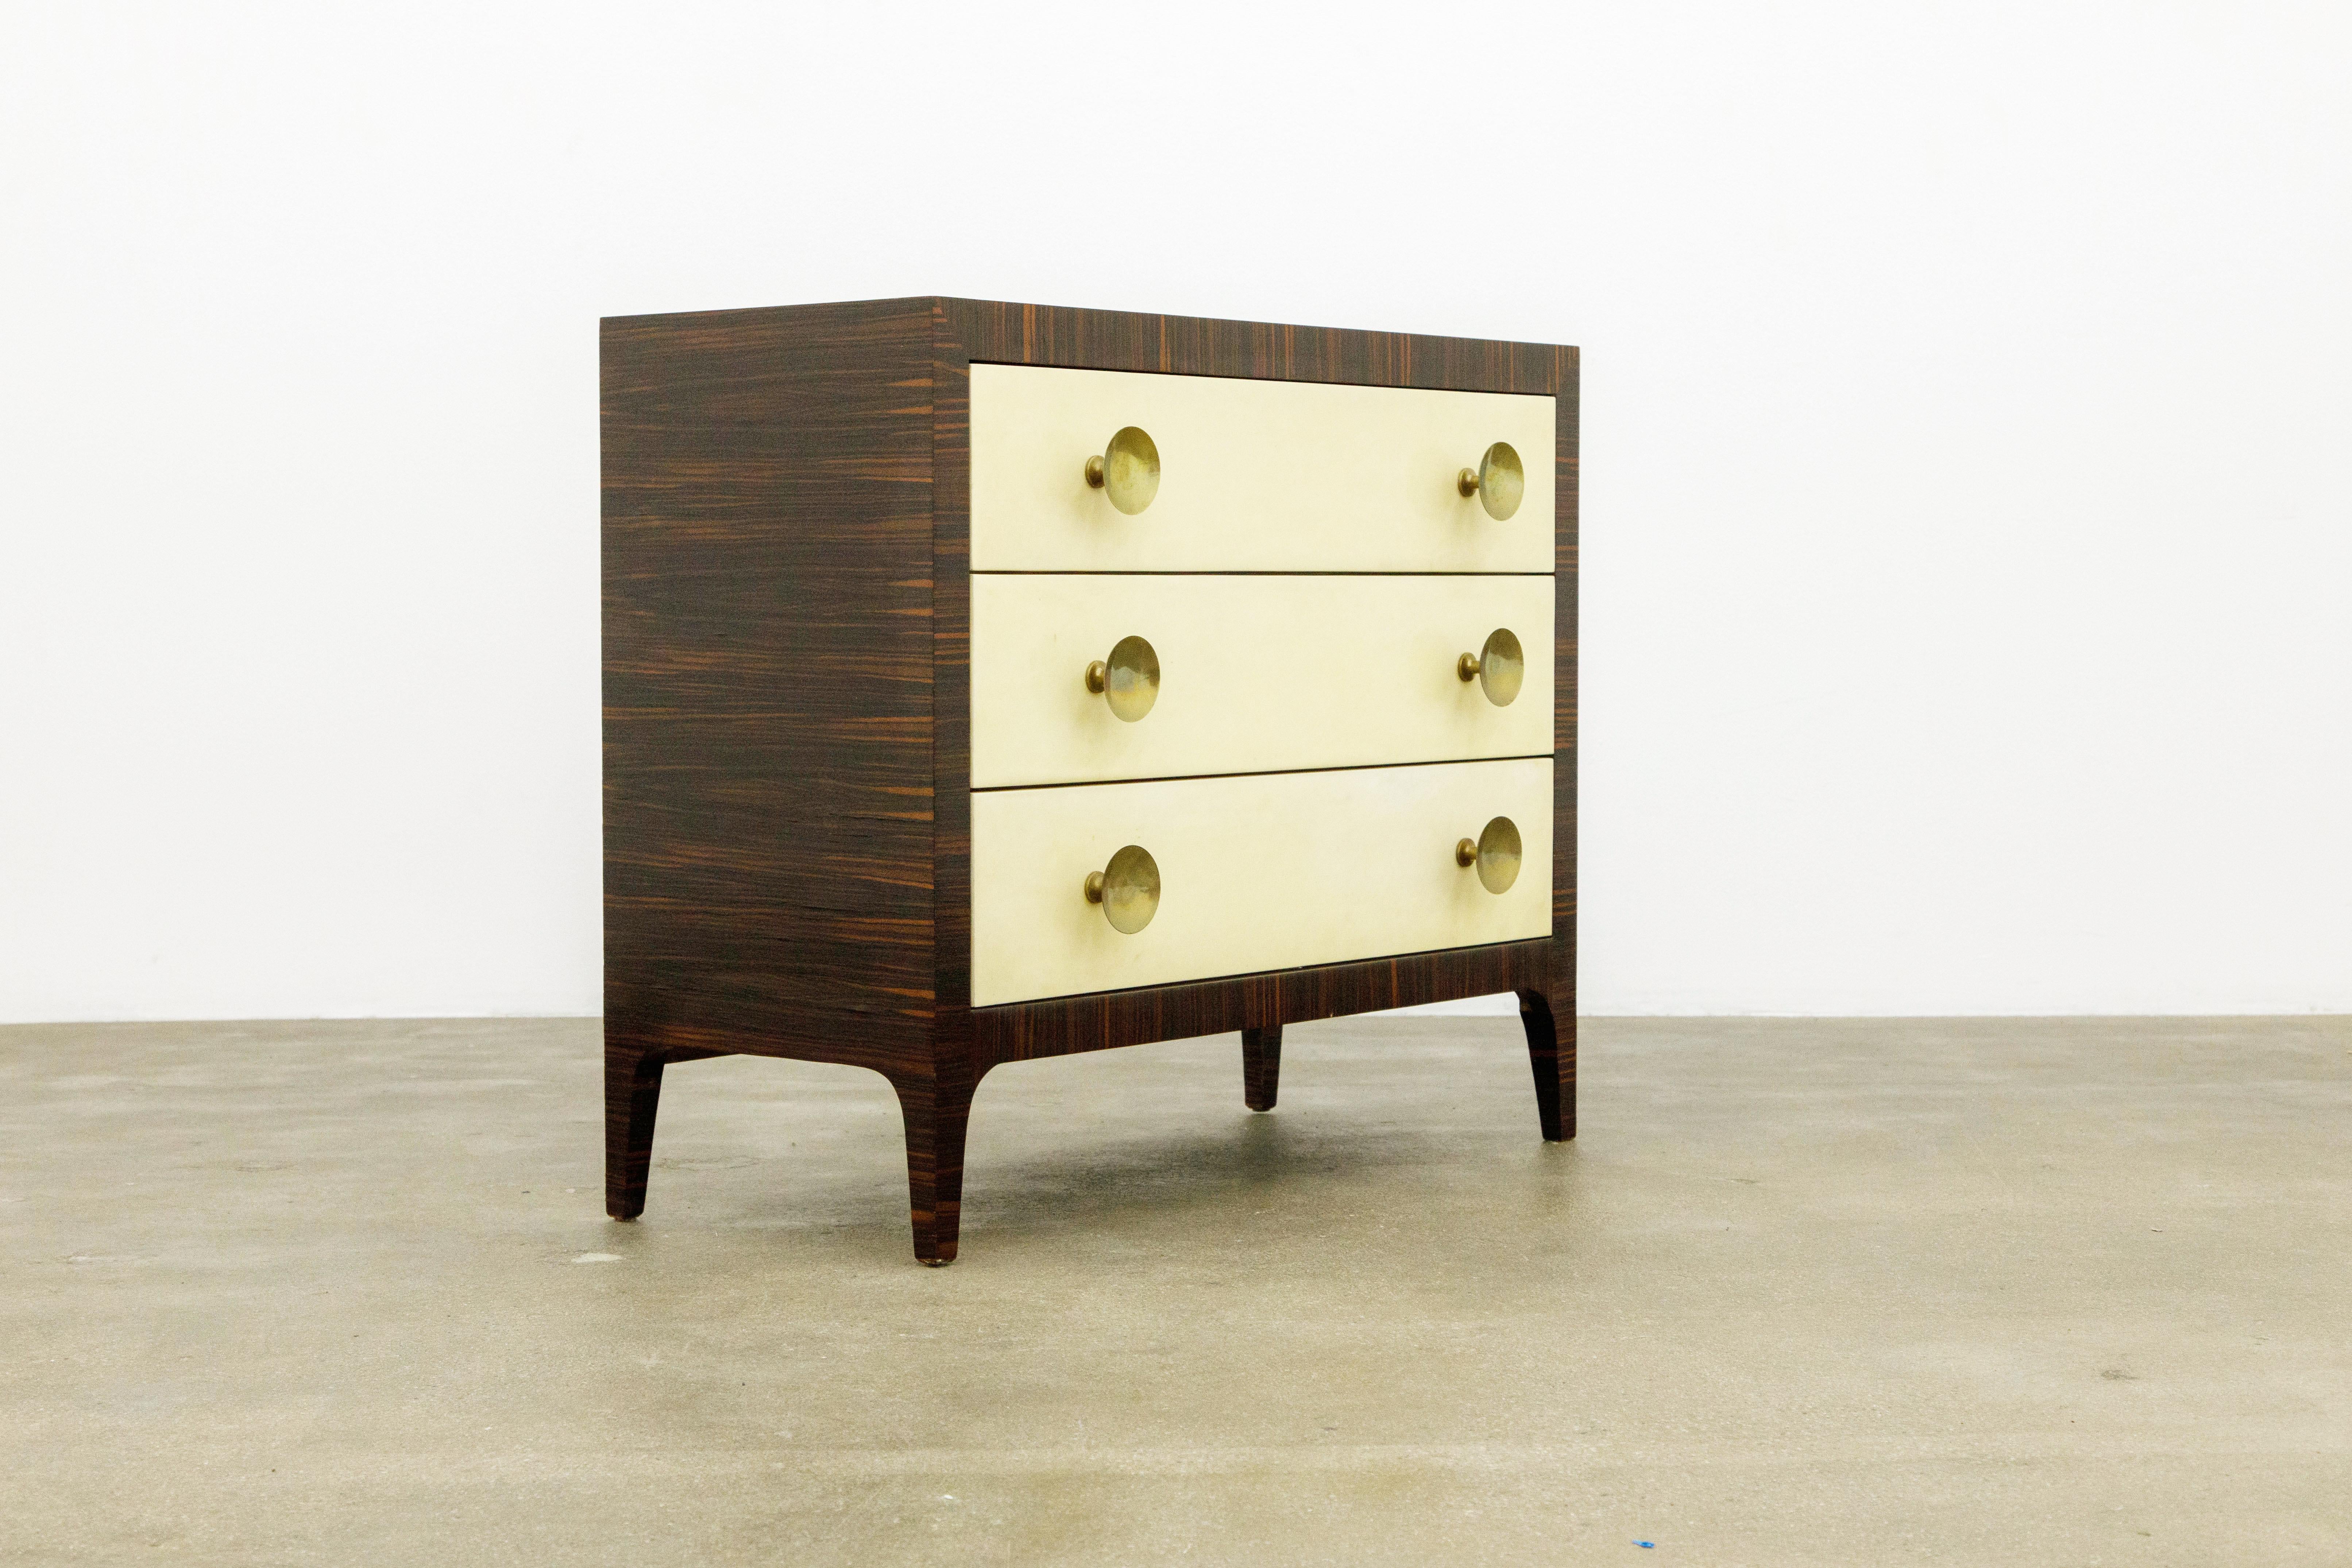 Unknown Macassar Ebony, Brass and Parchment Deco Styled Chest of Drawers, circa 1970s